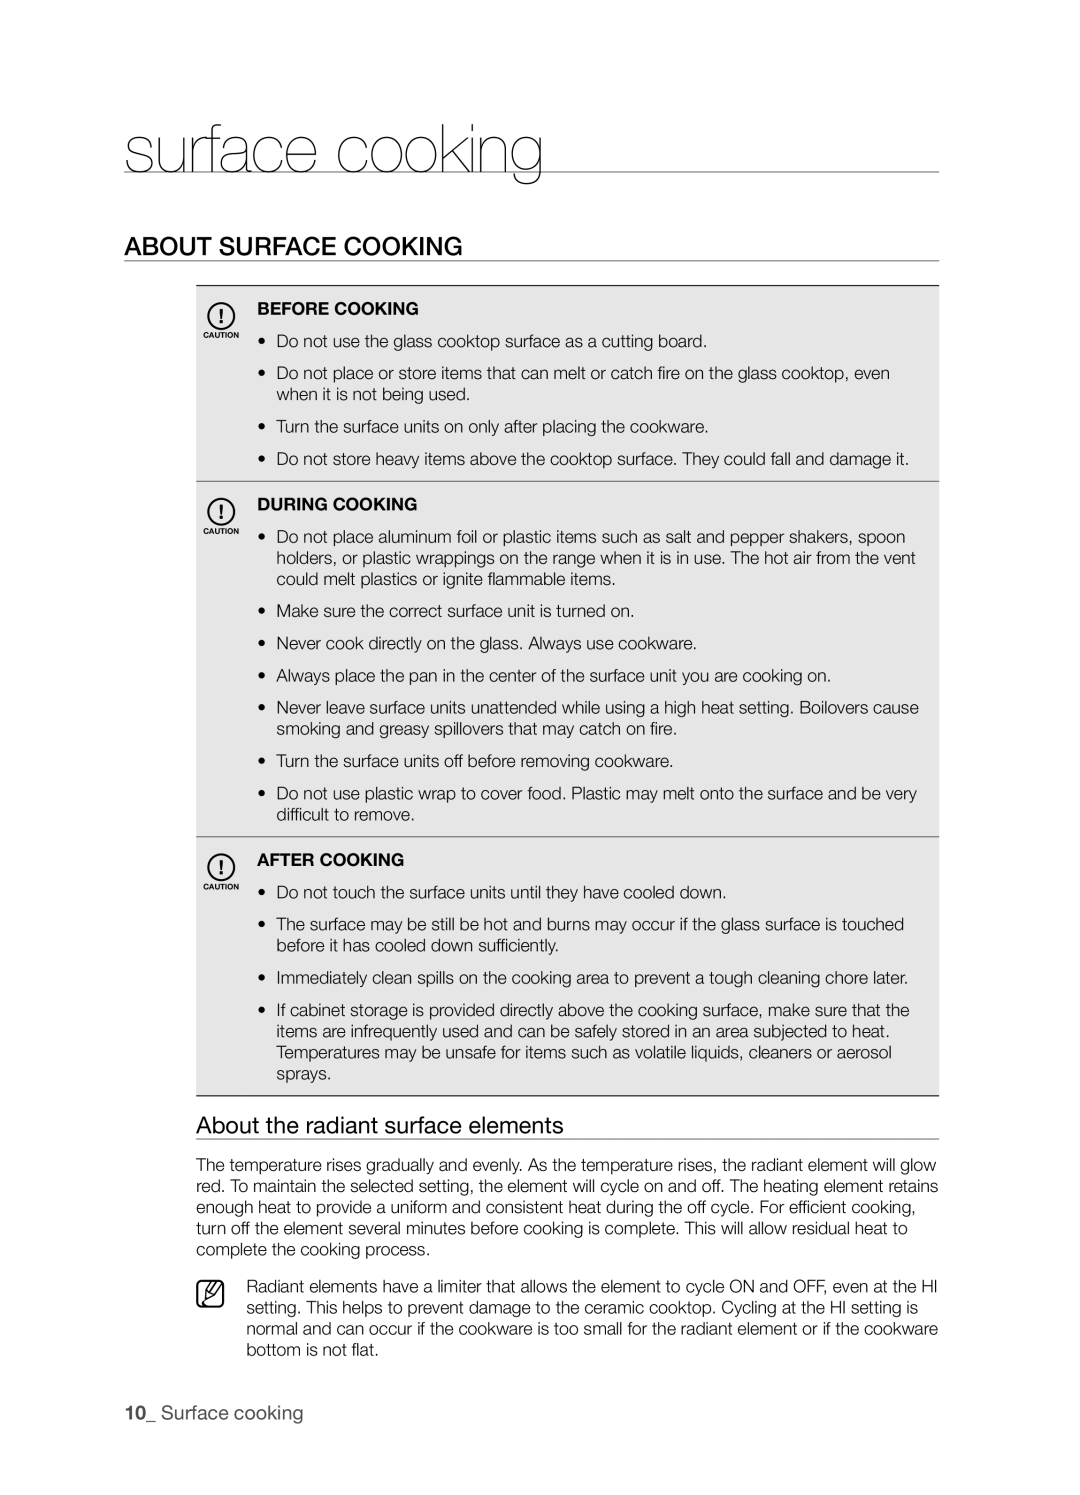 Samsung FTQ352IWX user manual About surface cooking, About the radiant surface elements, Surface cooking 